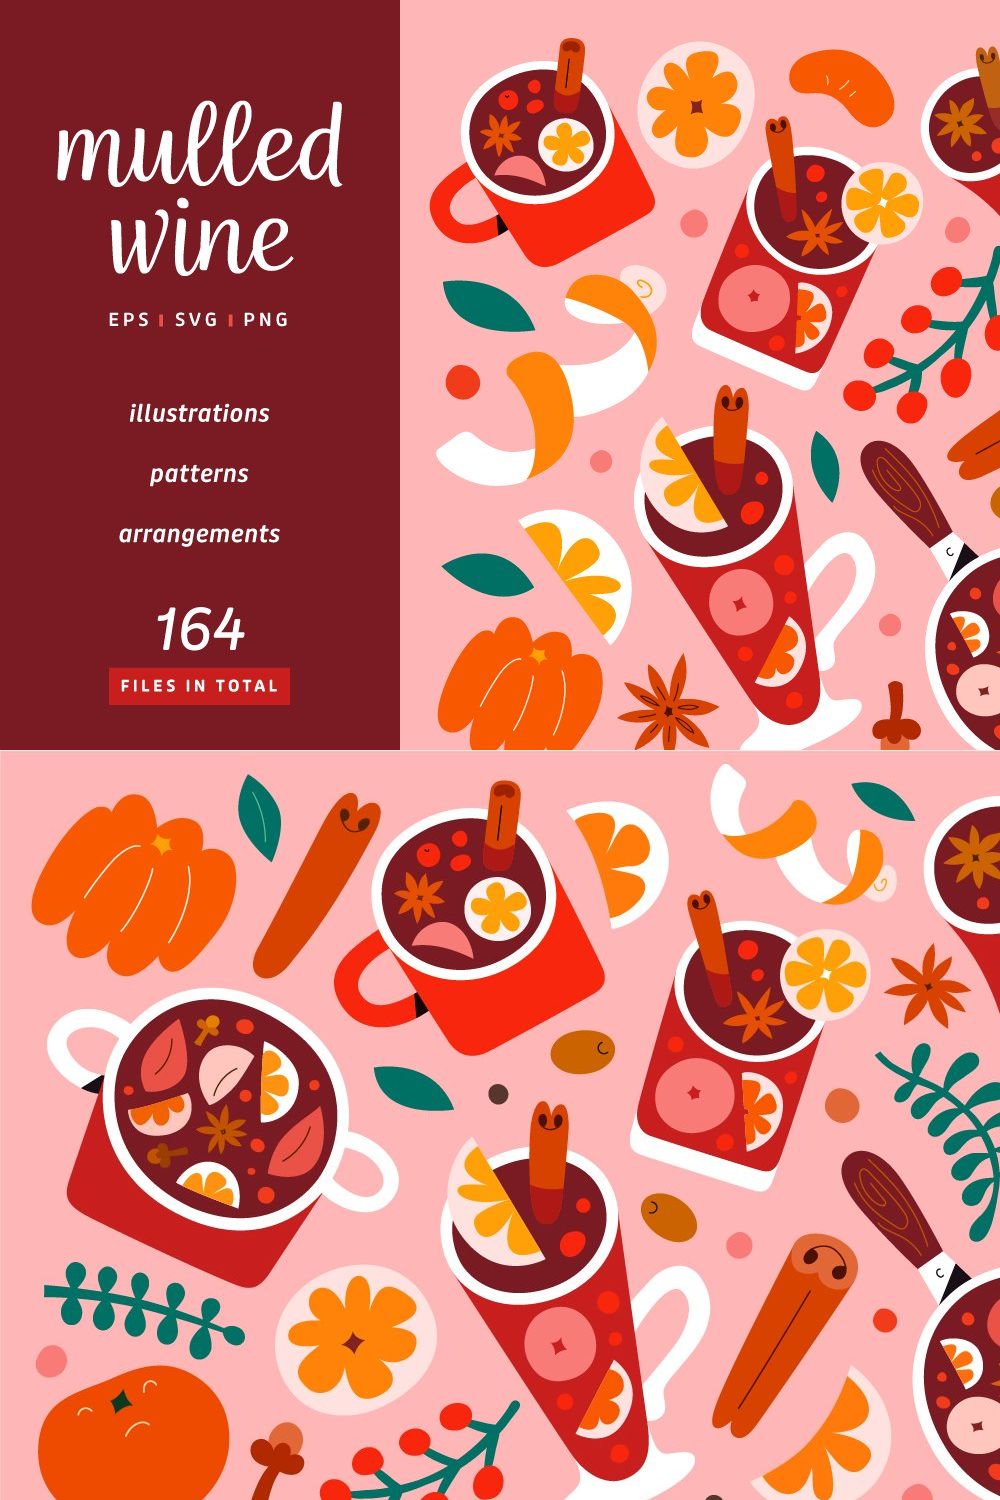 Mulled wine illustrations pinterest preview image.